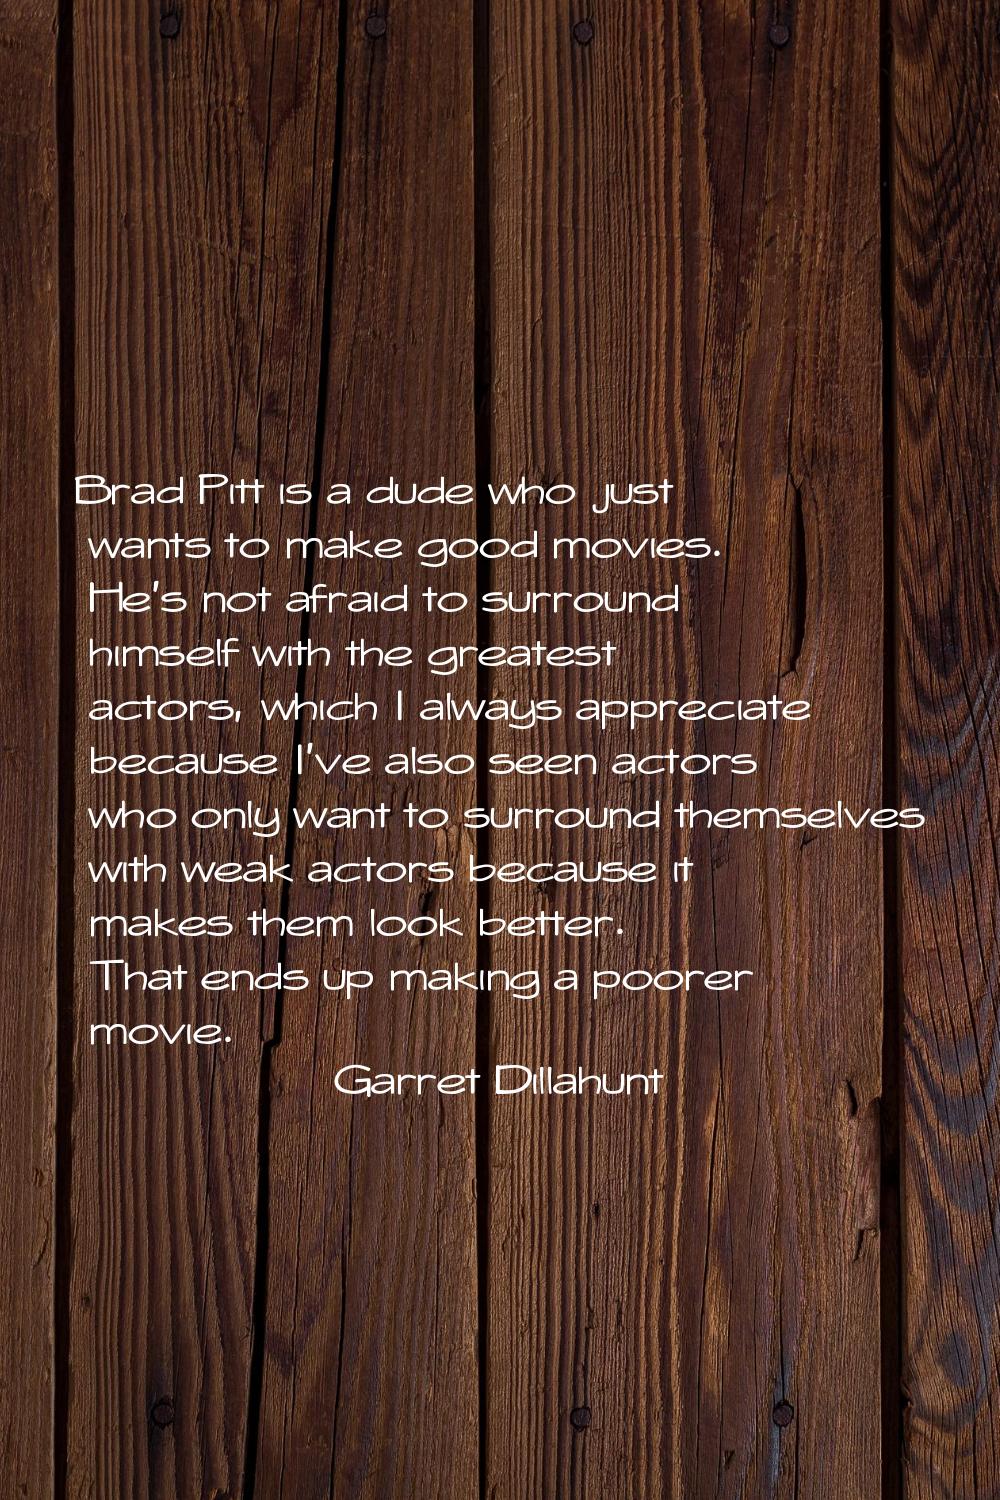 Brad Pitt is a dude who just wants to make good movies. He's not afraid to surround himself with th